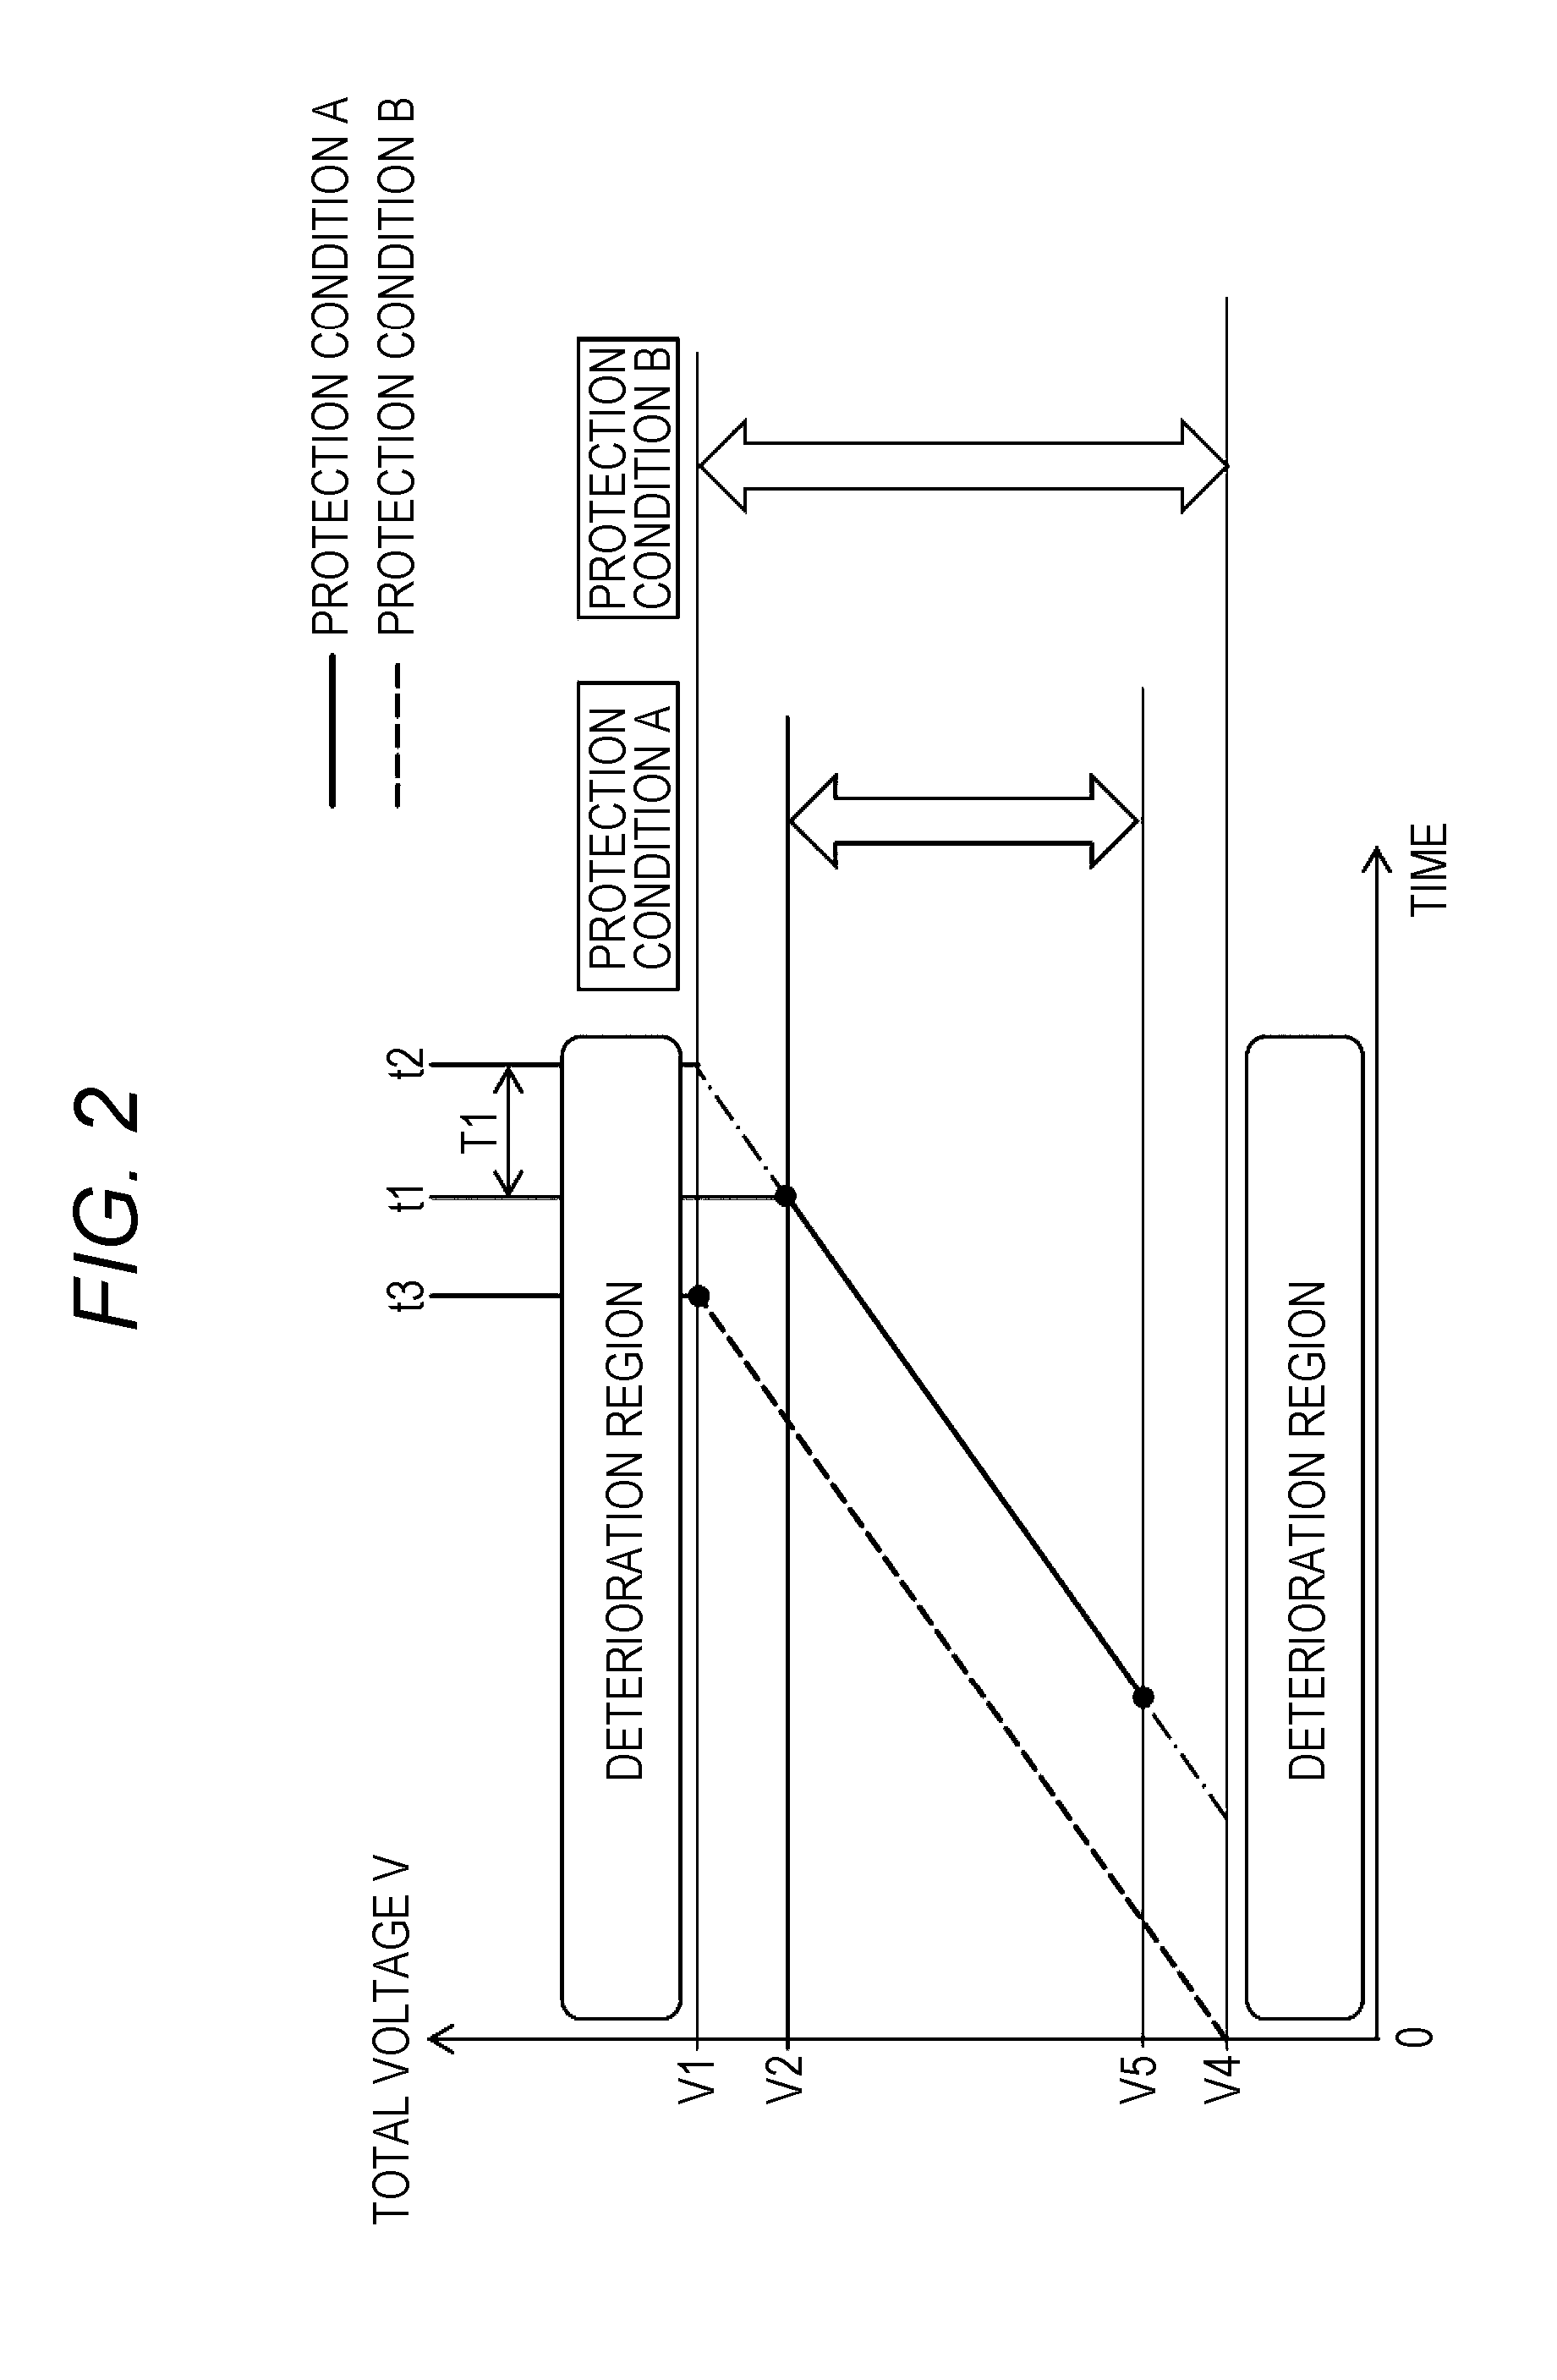 Monitoring device for secondary battery, battery pack, and protection system for secondary battery